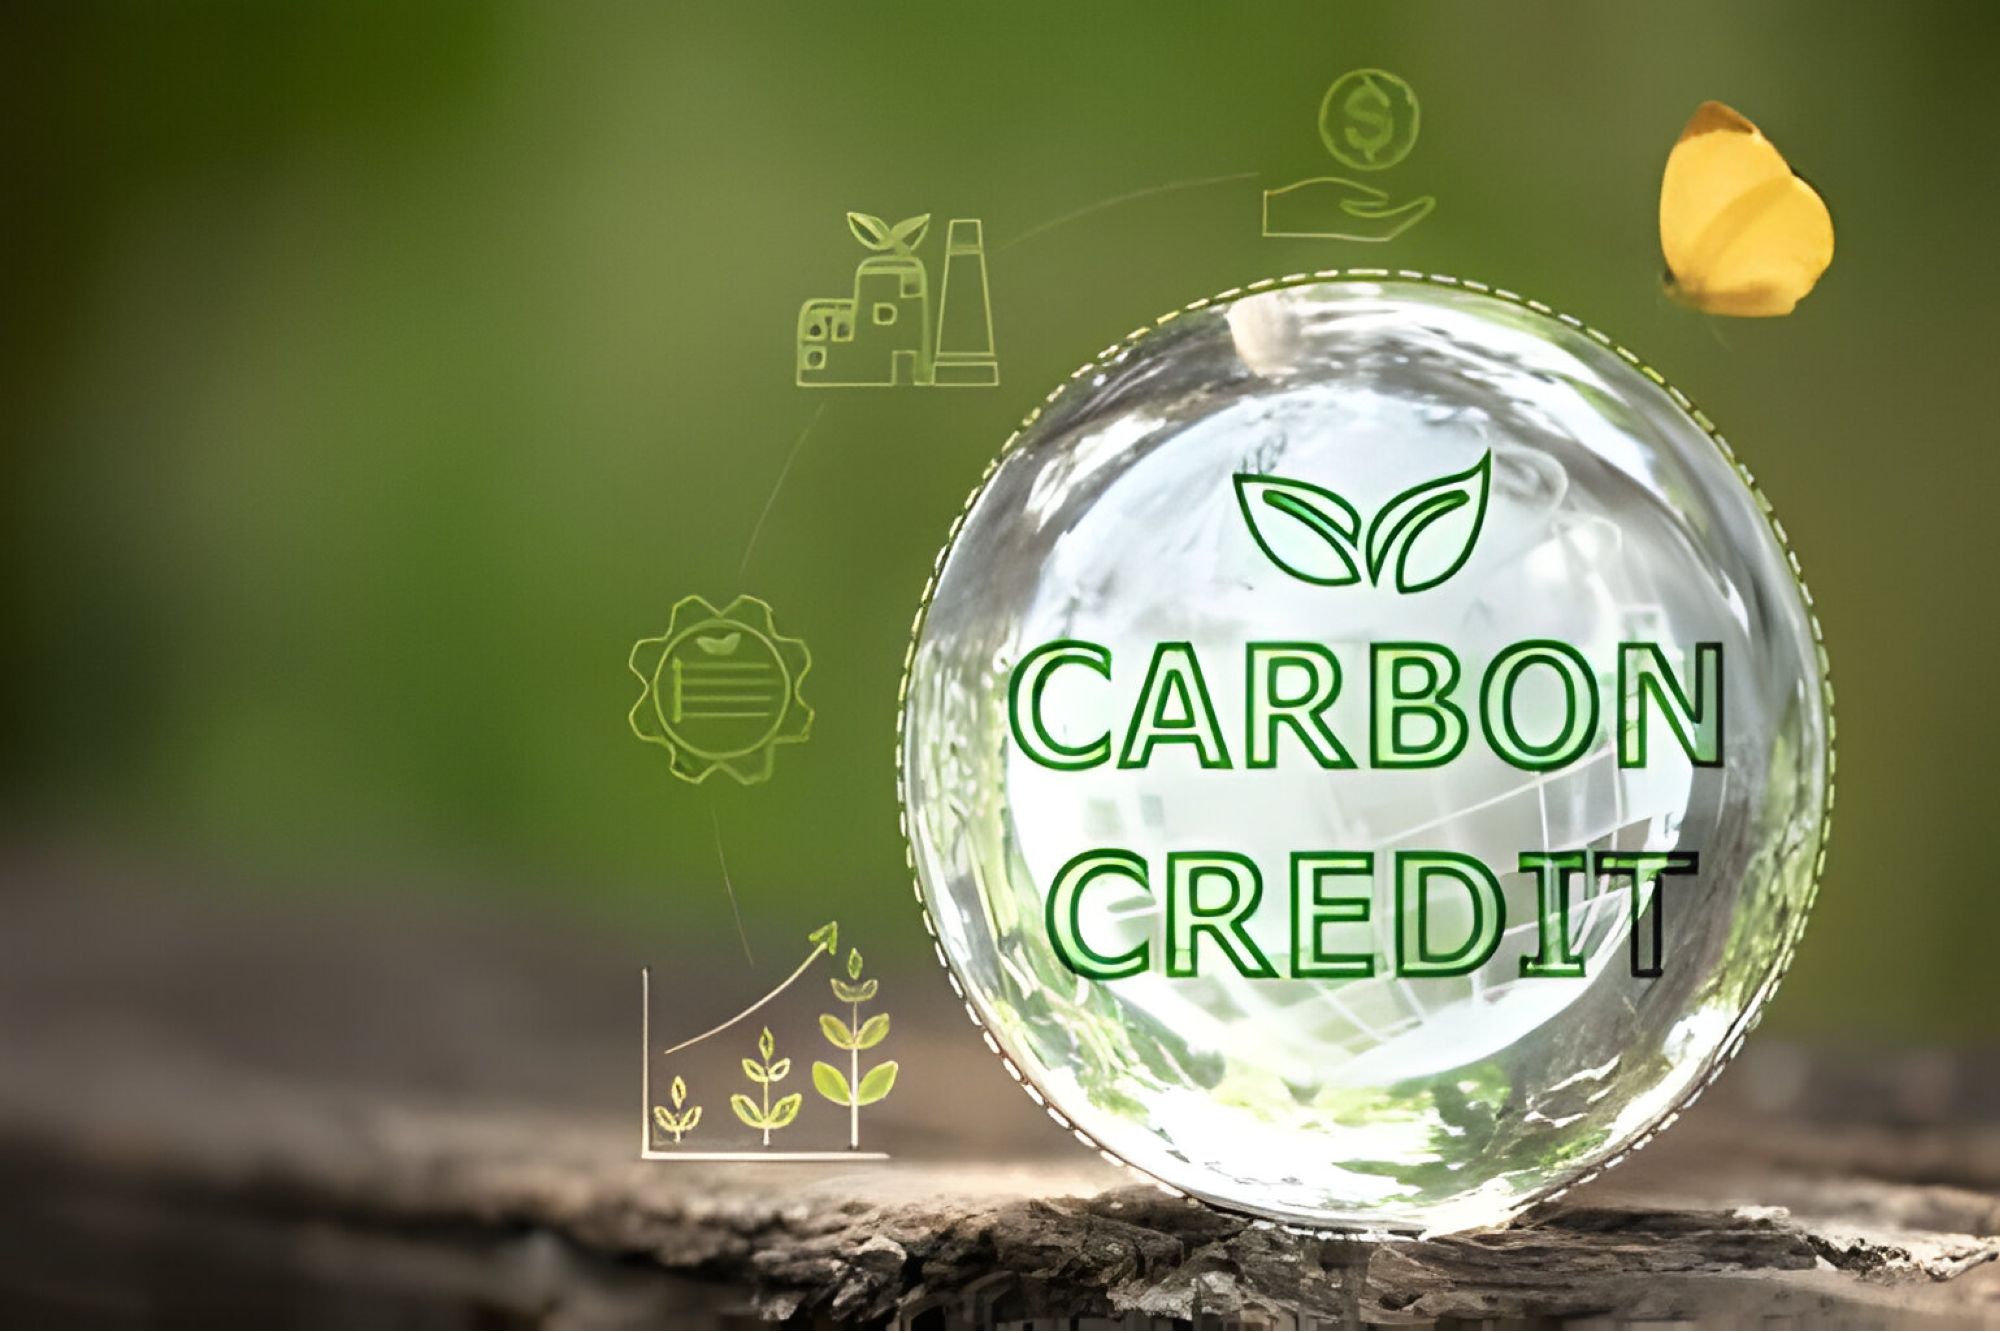 Carbon credit sees a promising future